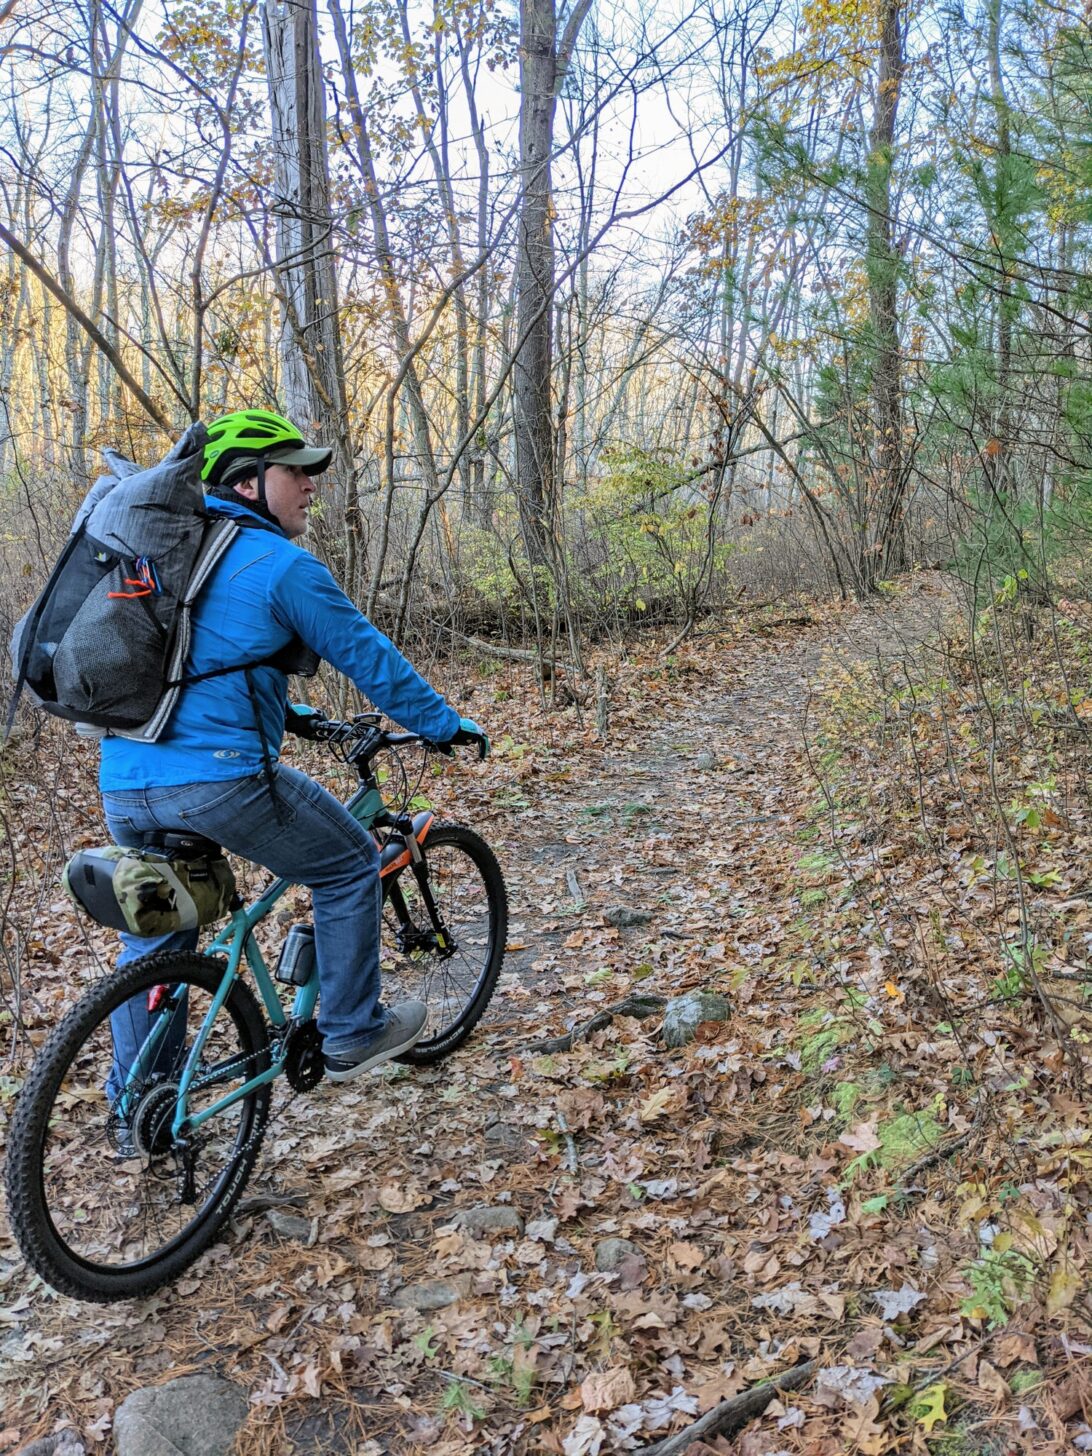 a man rides a bicycle while wearing the Nashville Pack Cutaway backpack.